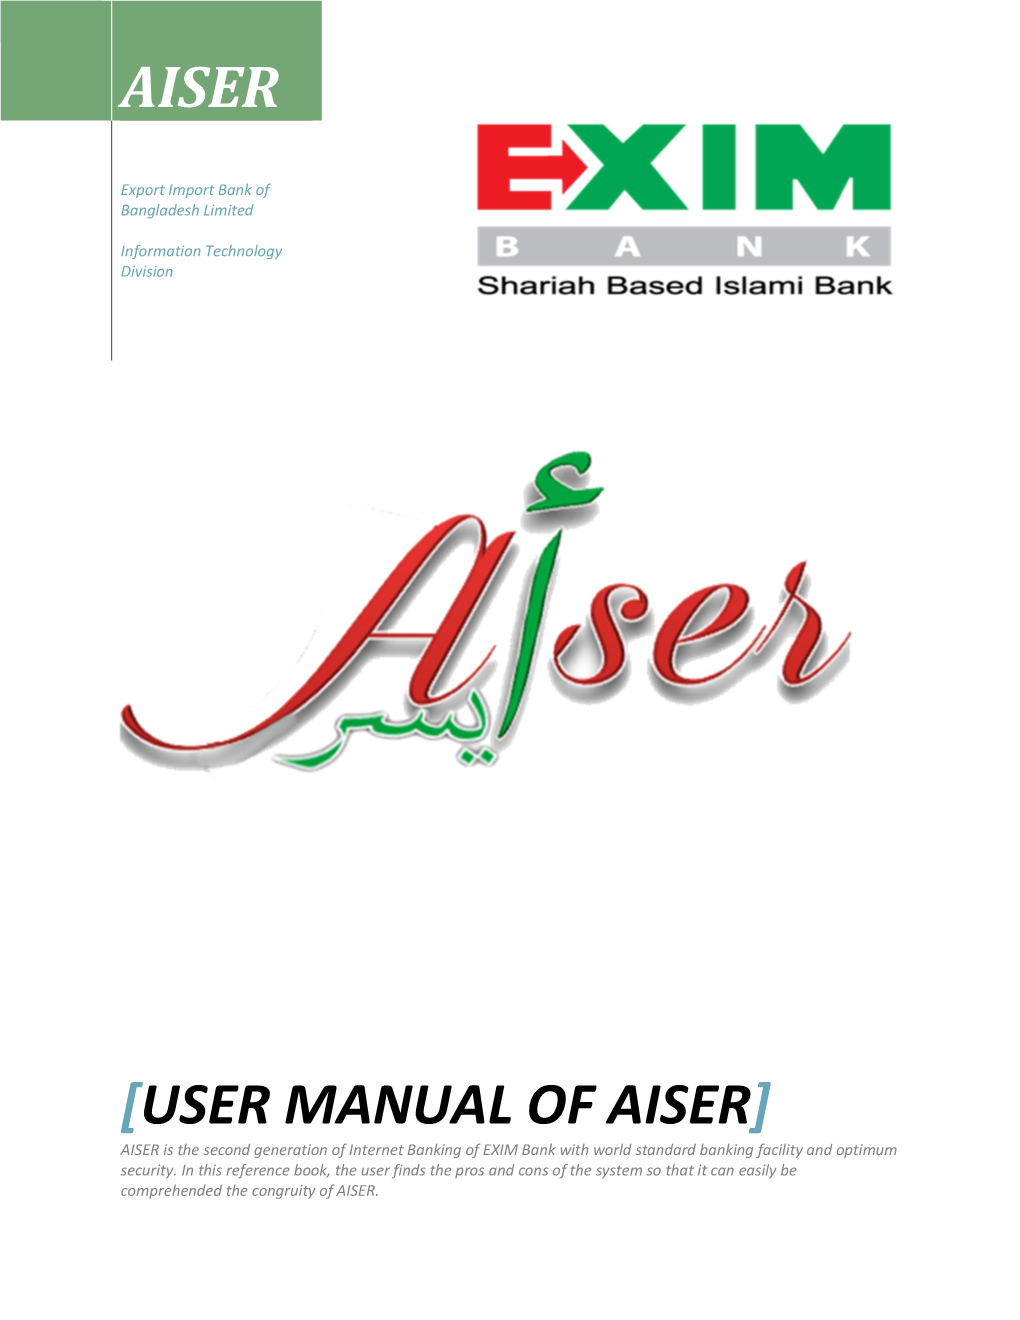 USER MANUAL of AISER] AISER Is the Second Generation of Internet Banking of EXIM Bank with World Standard Banking Facility and Optimum Security